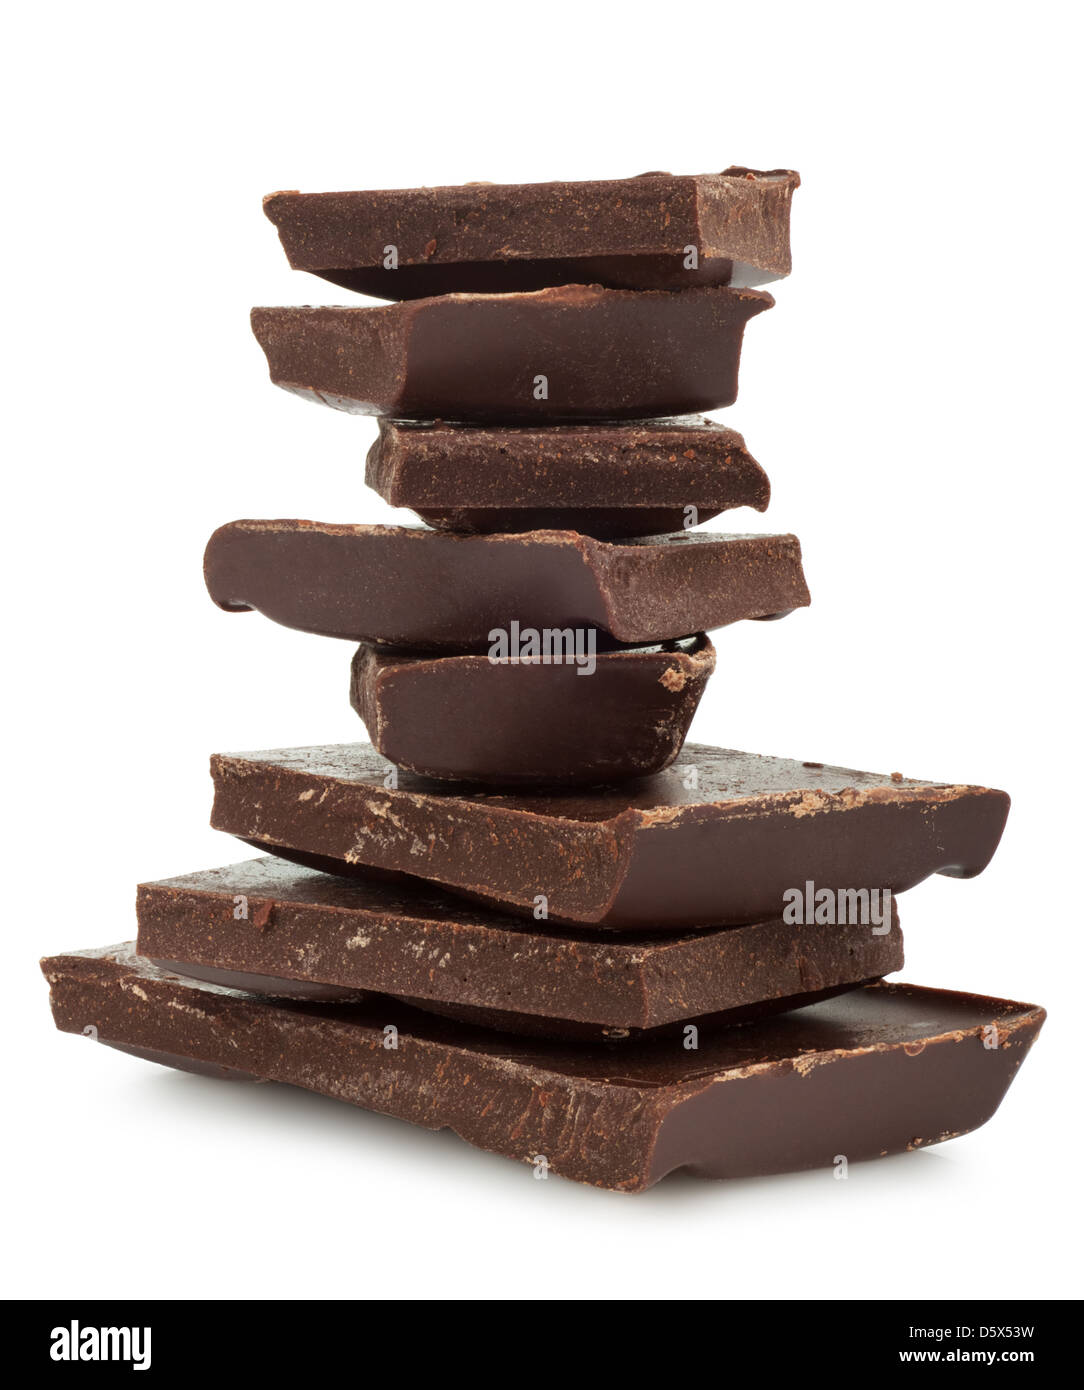 Chocolate Bar With A Missing Bite On White Background Stock Photo